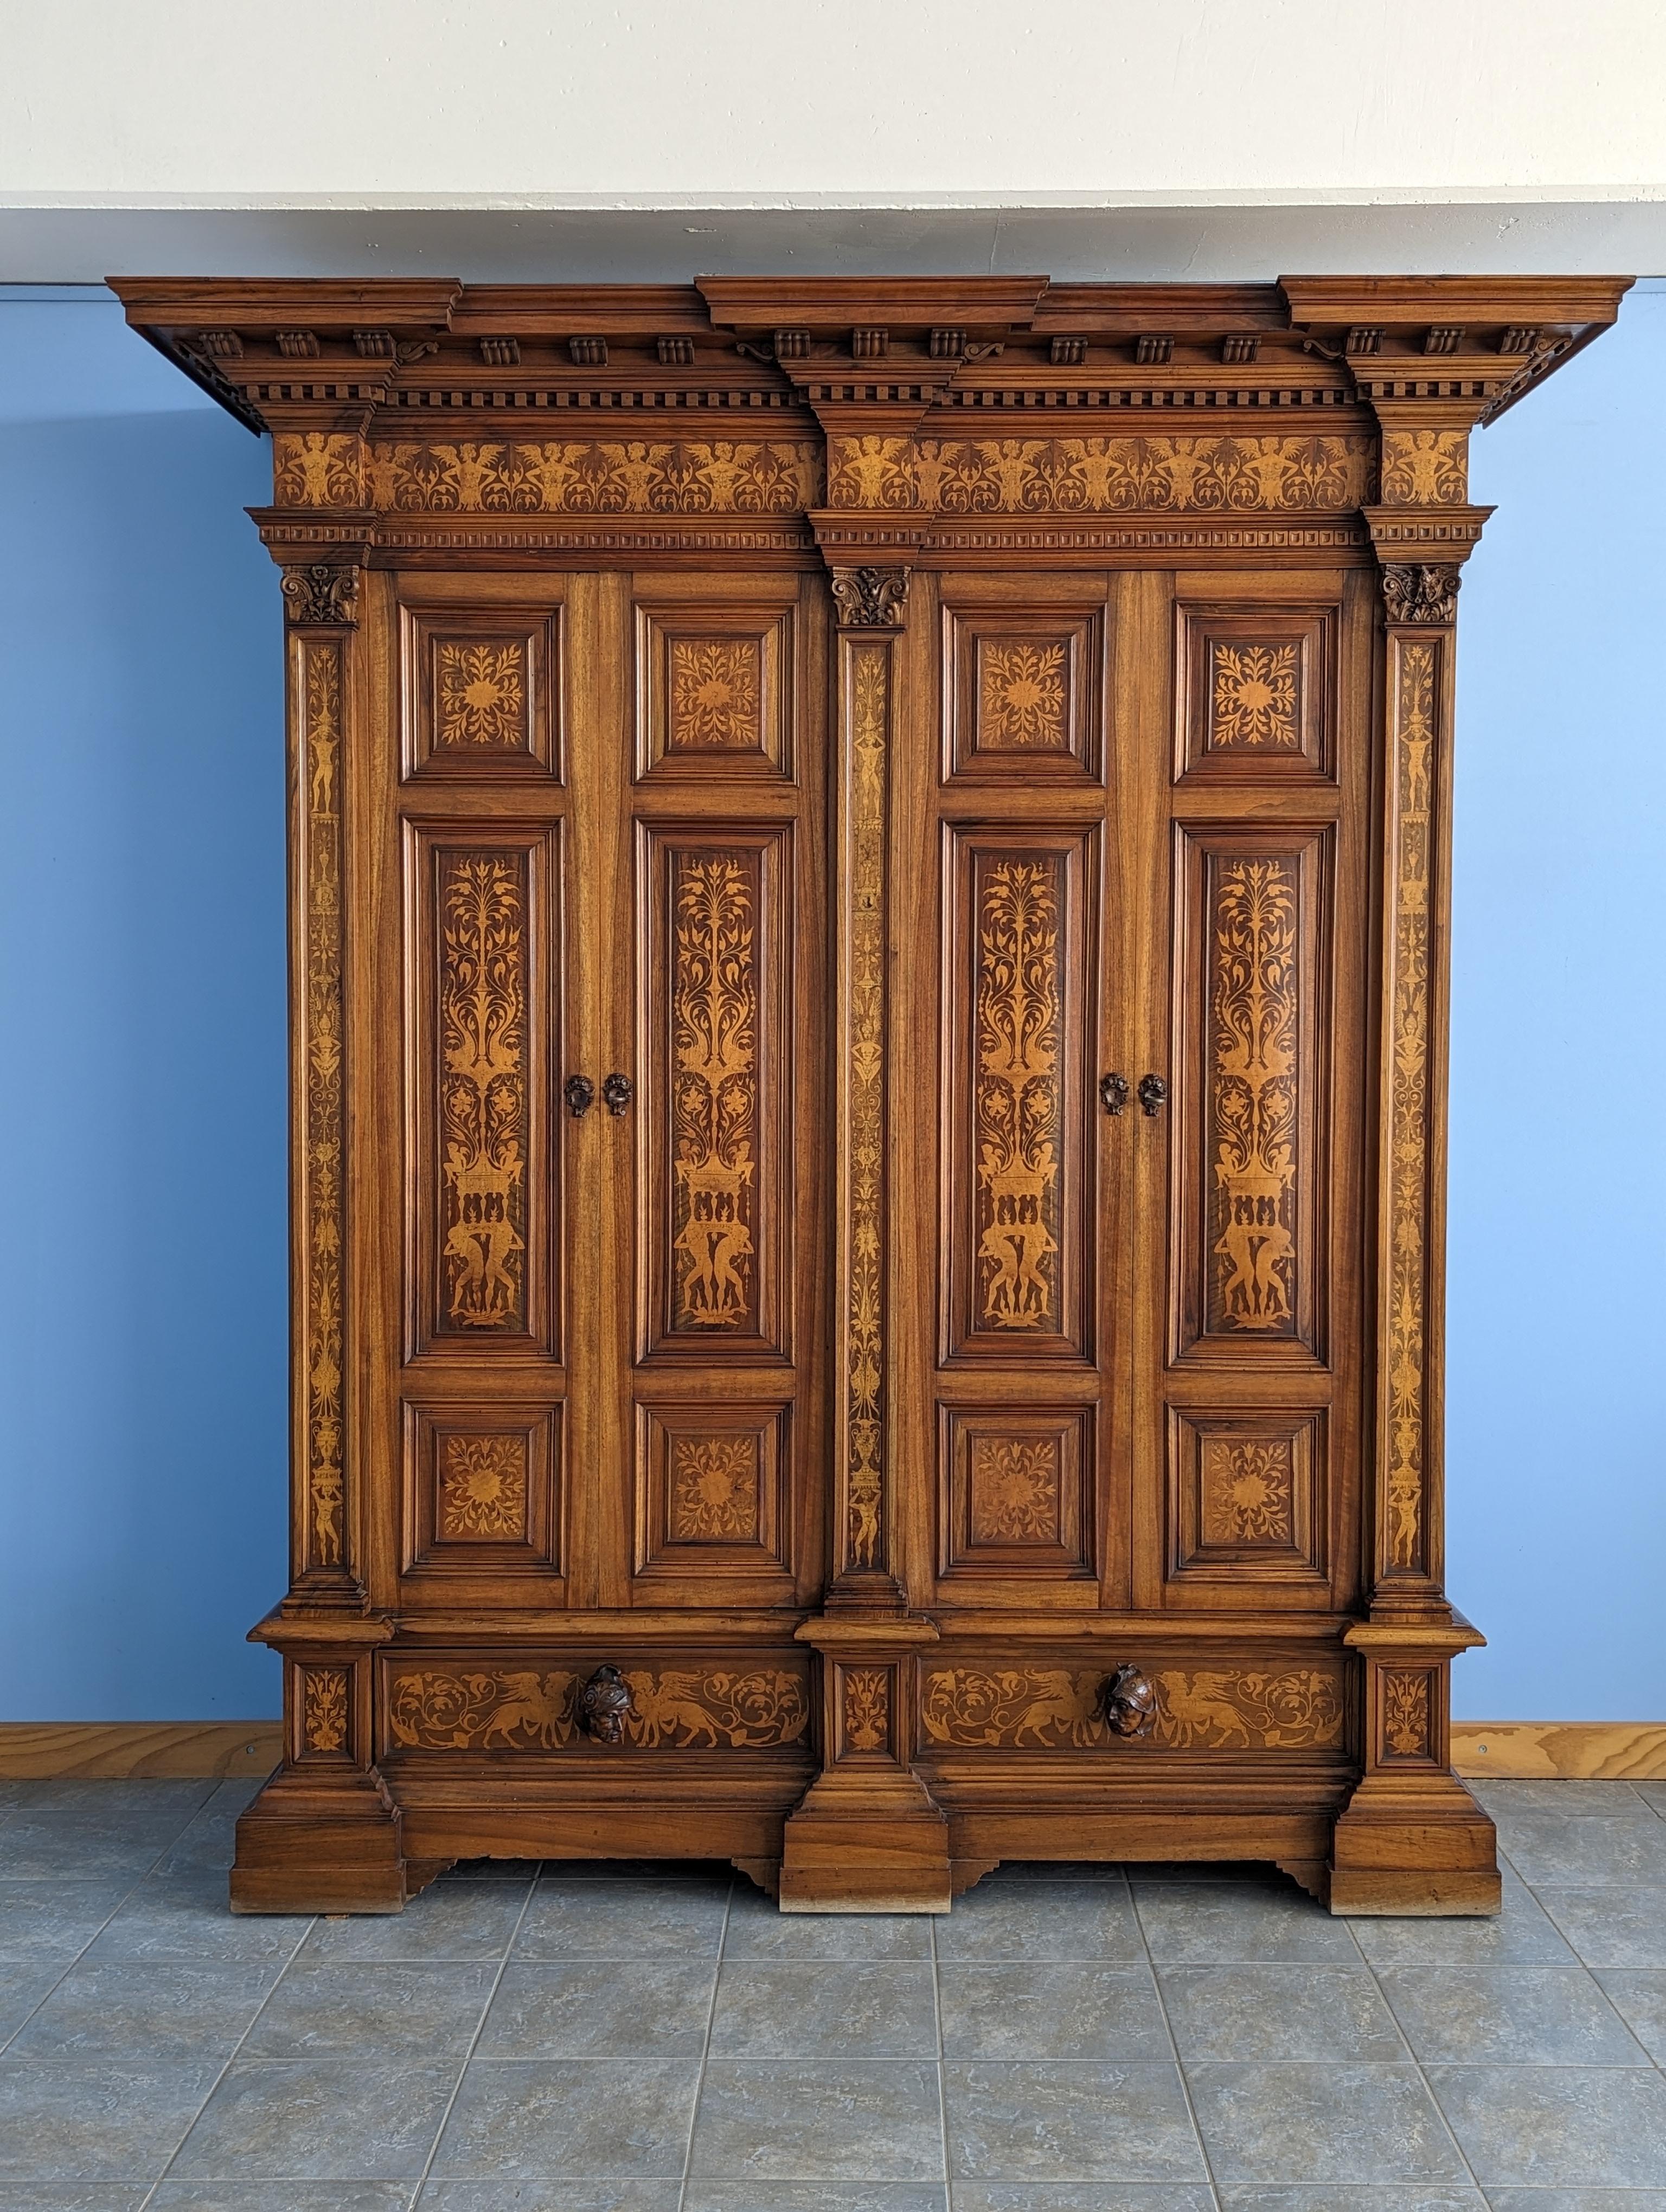 This stunning antique armoire is a true masterpiece of neo-Renaissance design, crafted in the late 19th century in Continental Europe, most likely in Austria or Germany. Its rich walnut exterior is complemented by a spruce interior, providing a